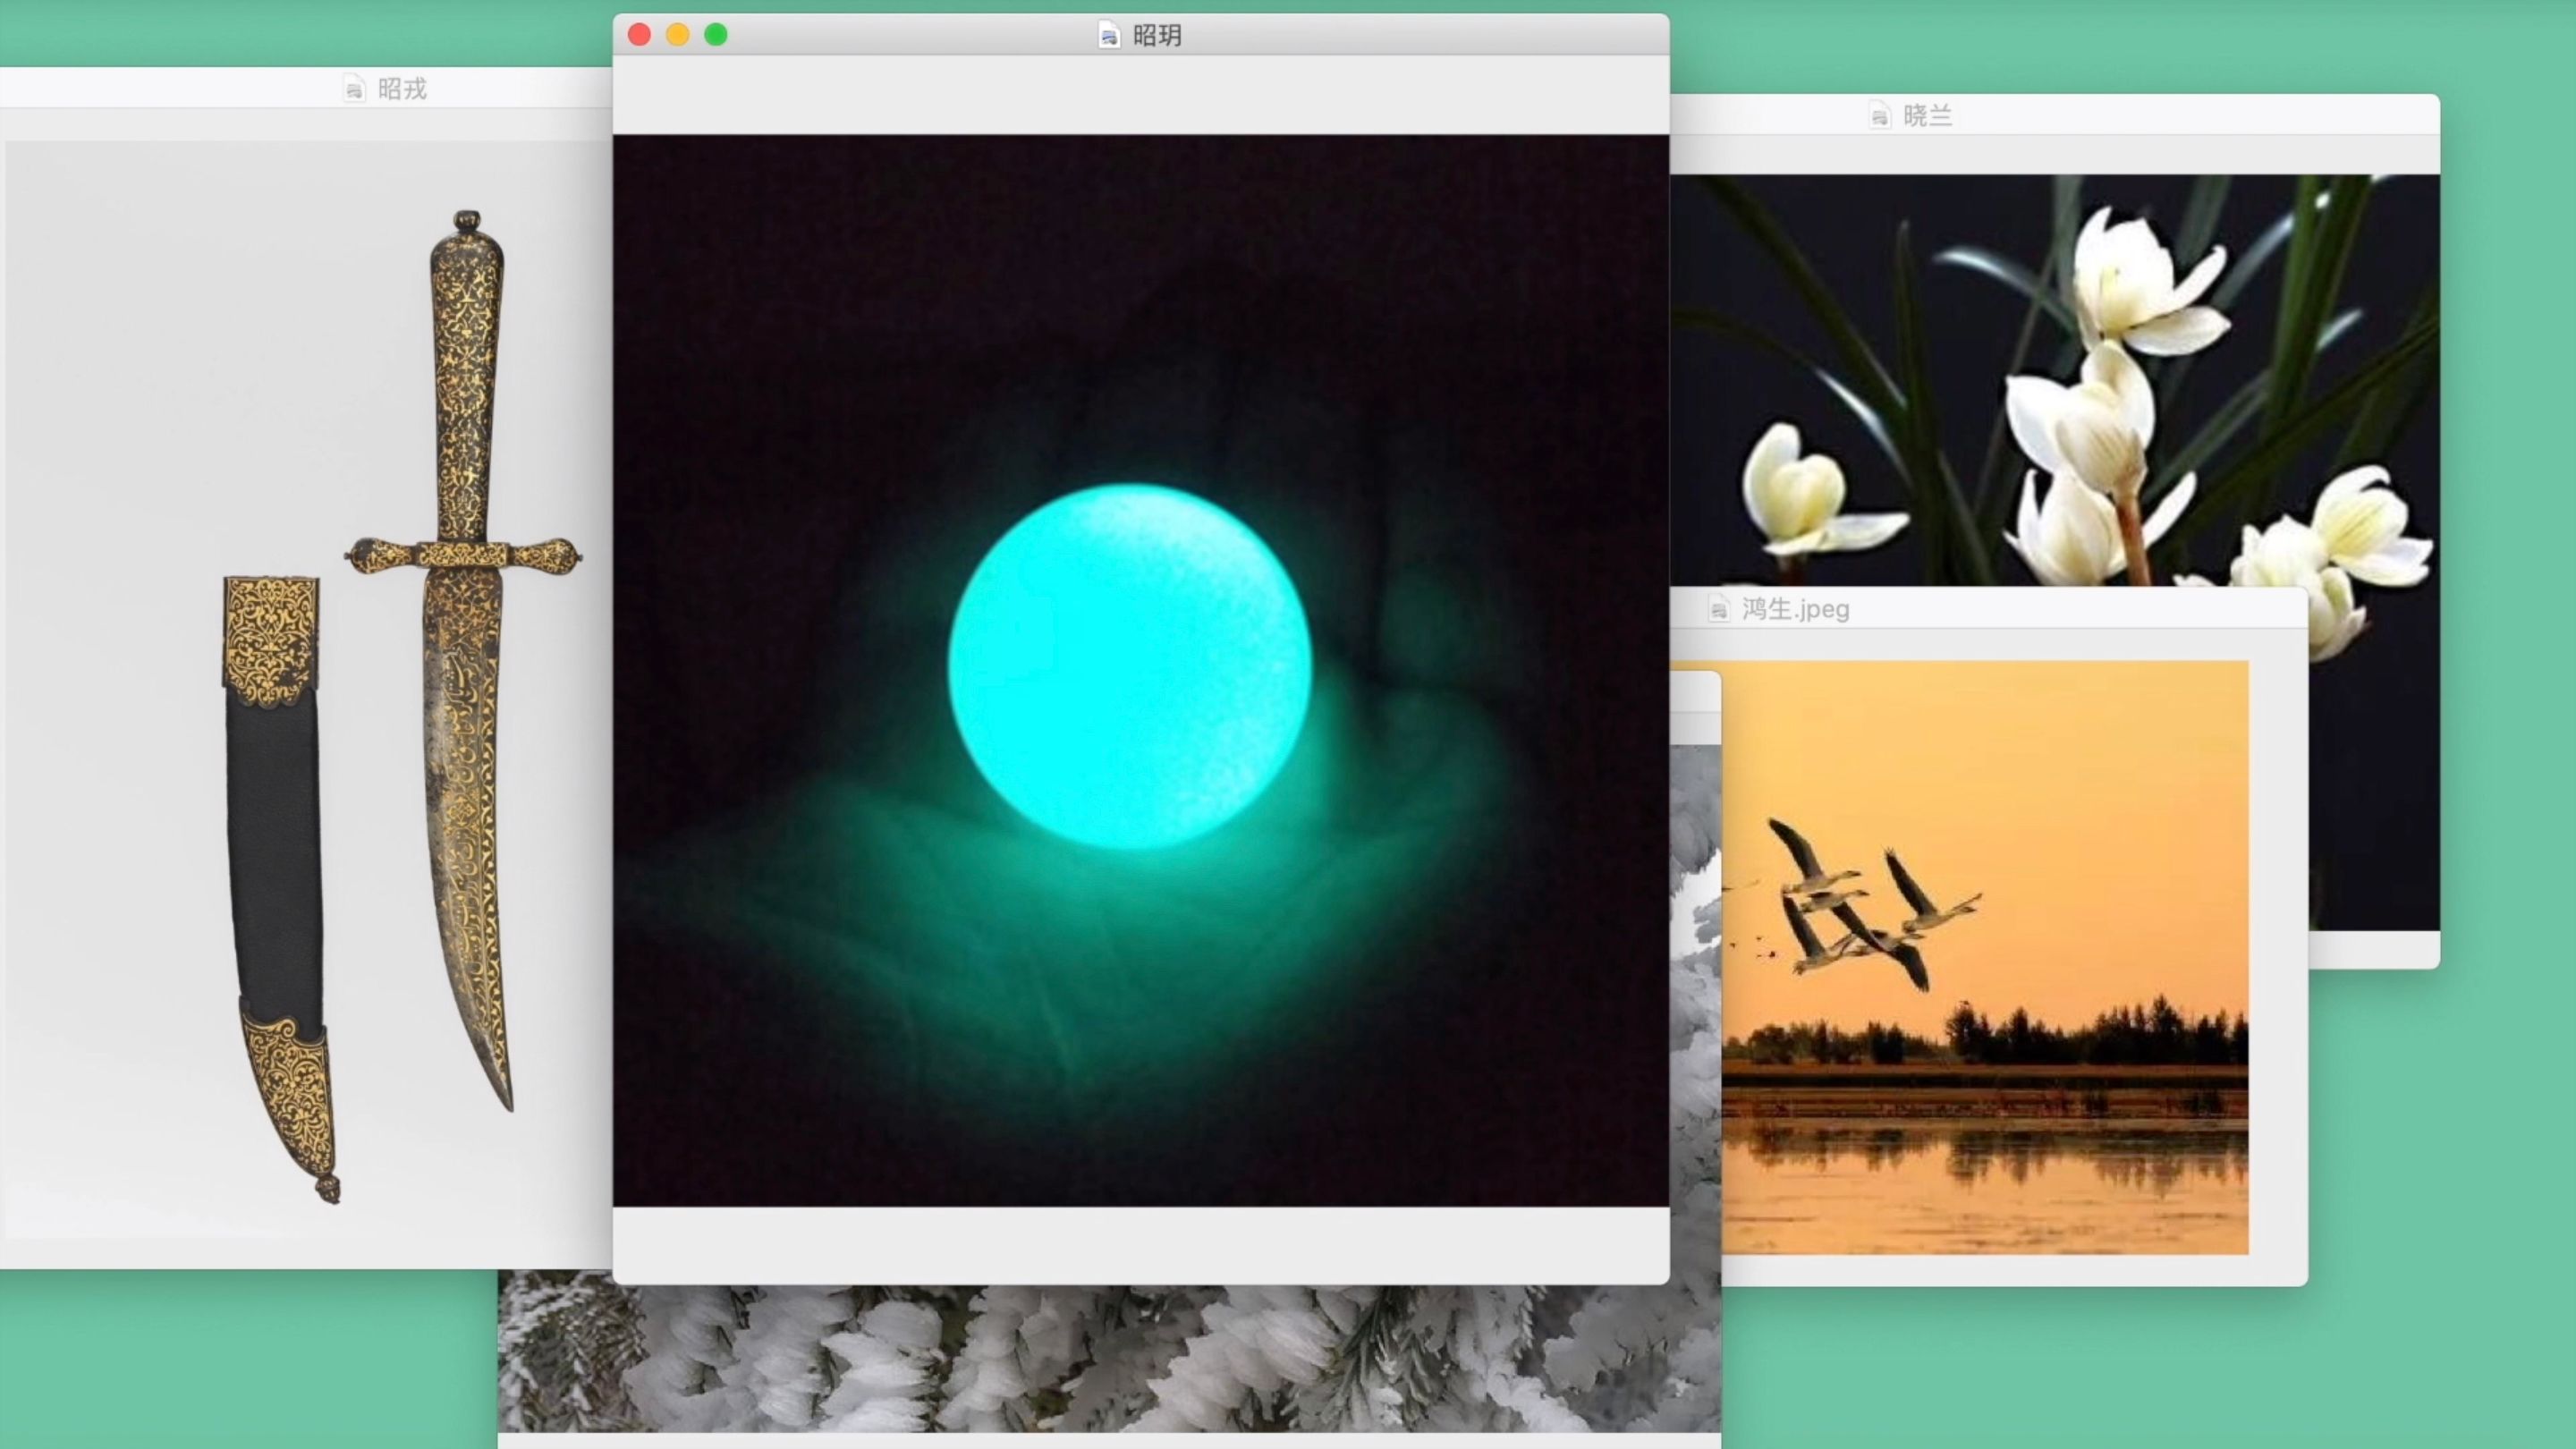 Multiple windows on a computer screen against a green background. Images: a knife and sheath, a green glowing orb, birds, flowers